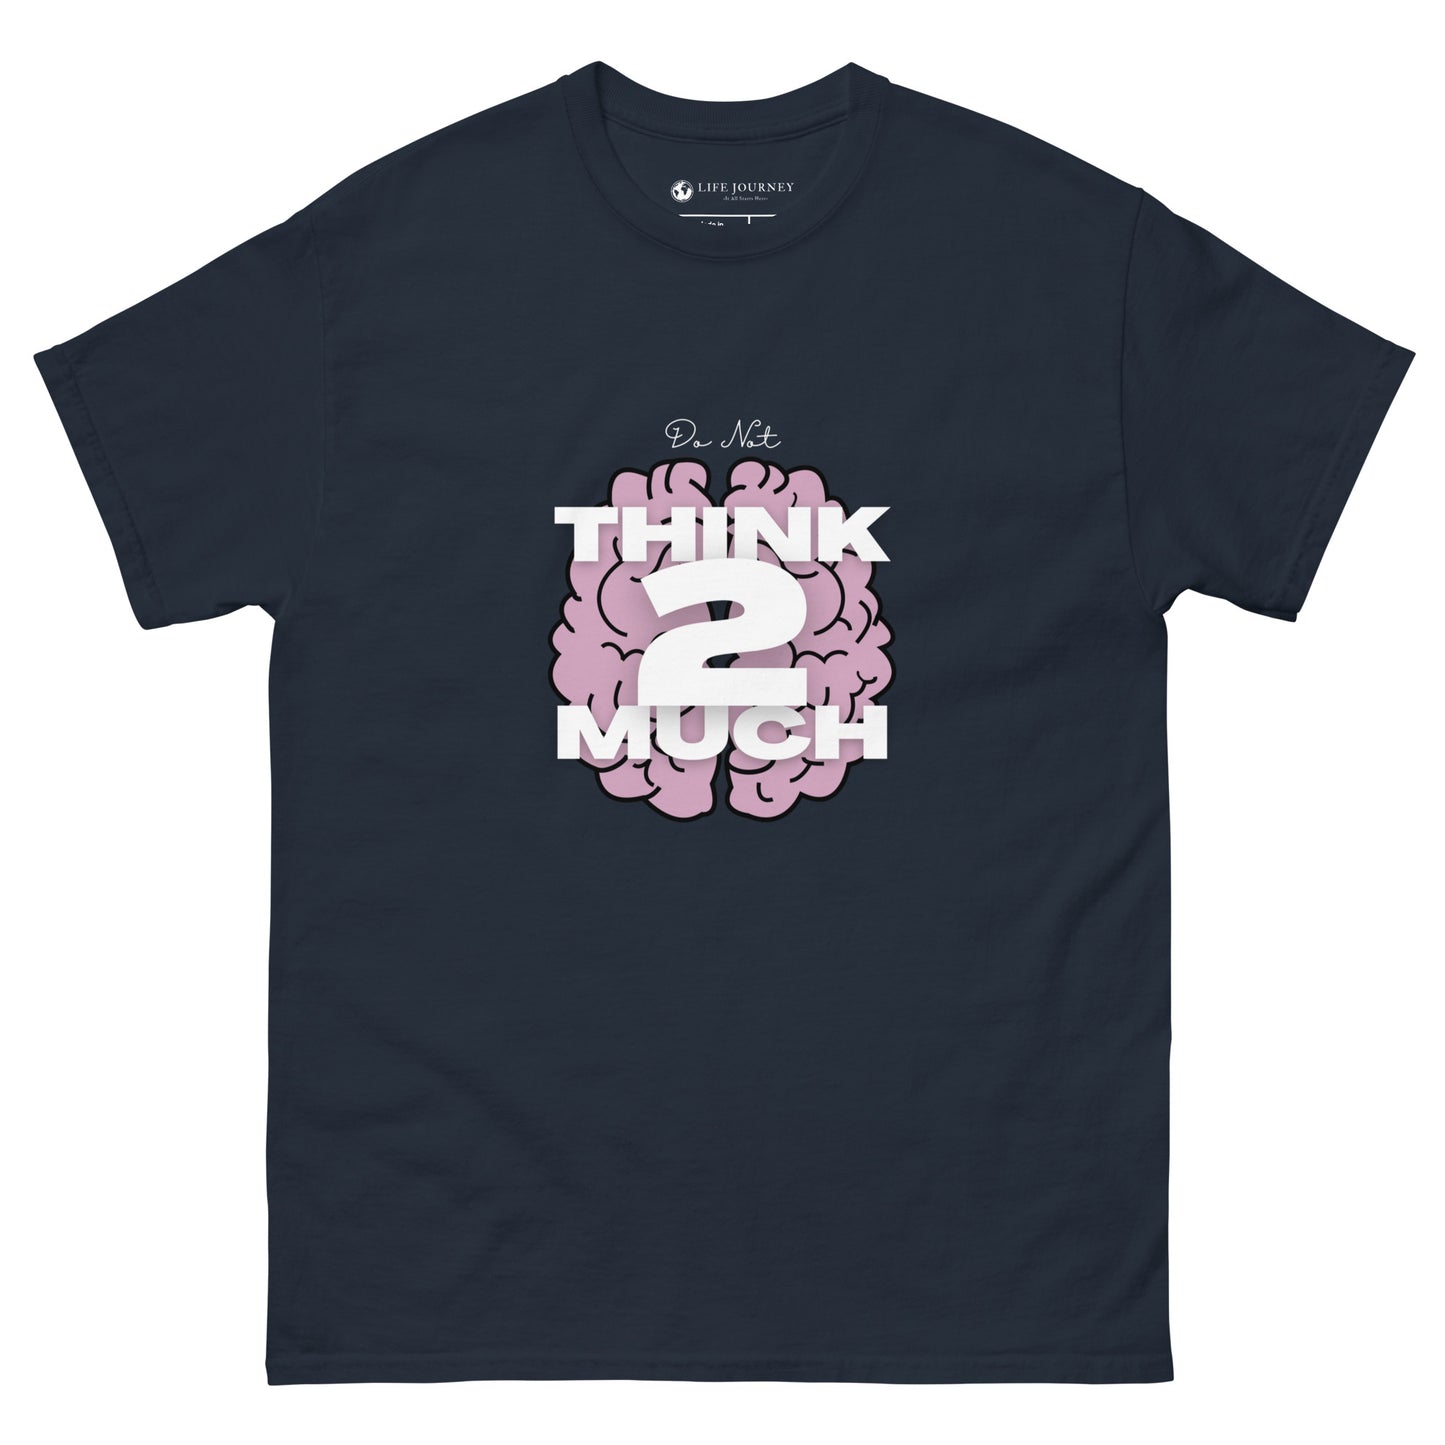 Men's classic tee Do Not Think too Much